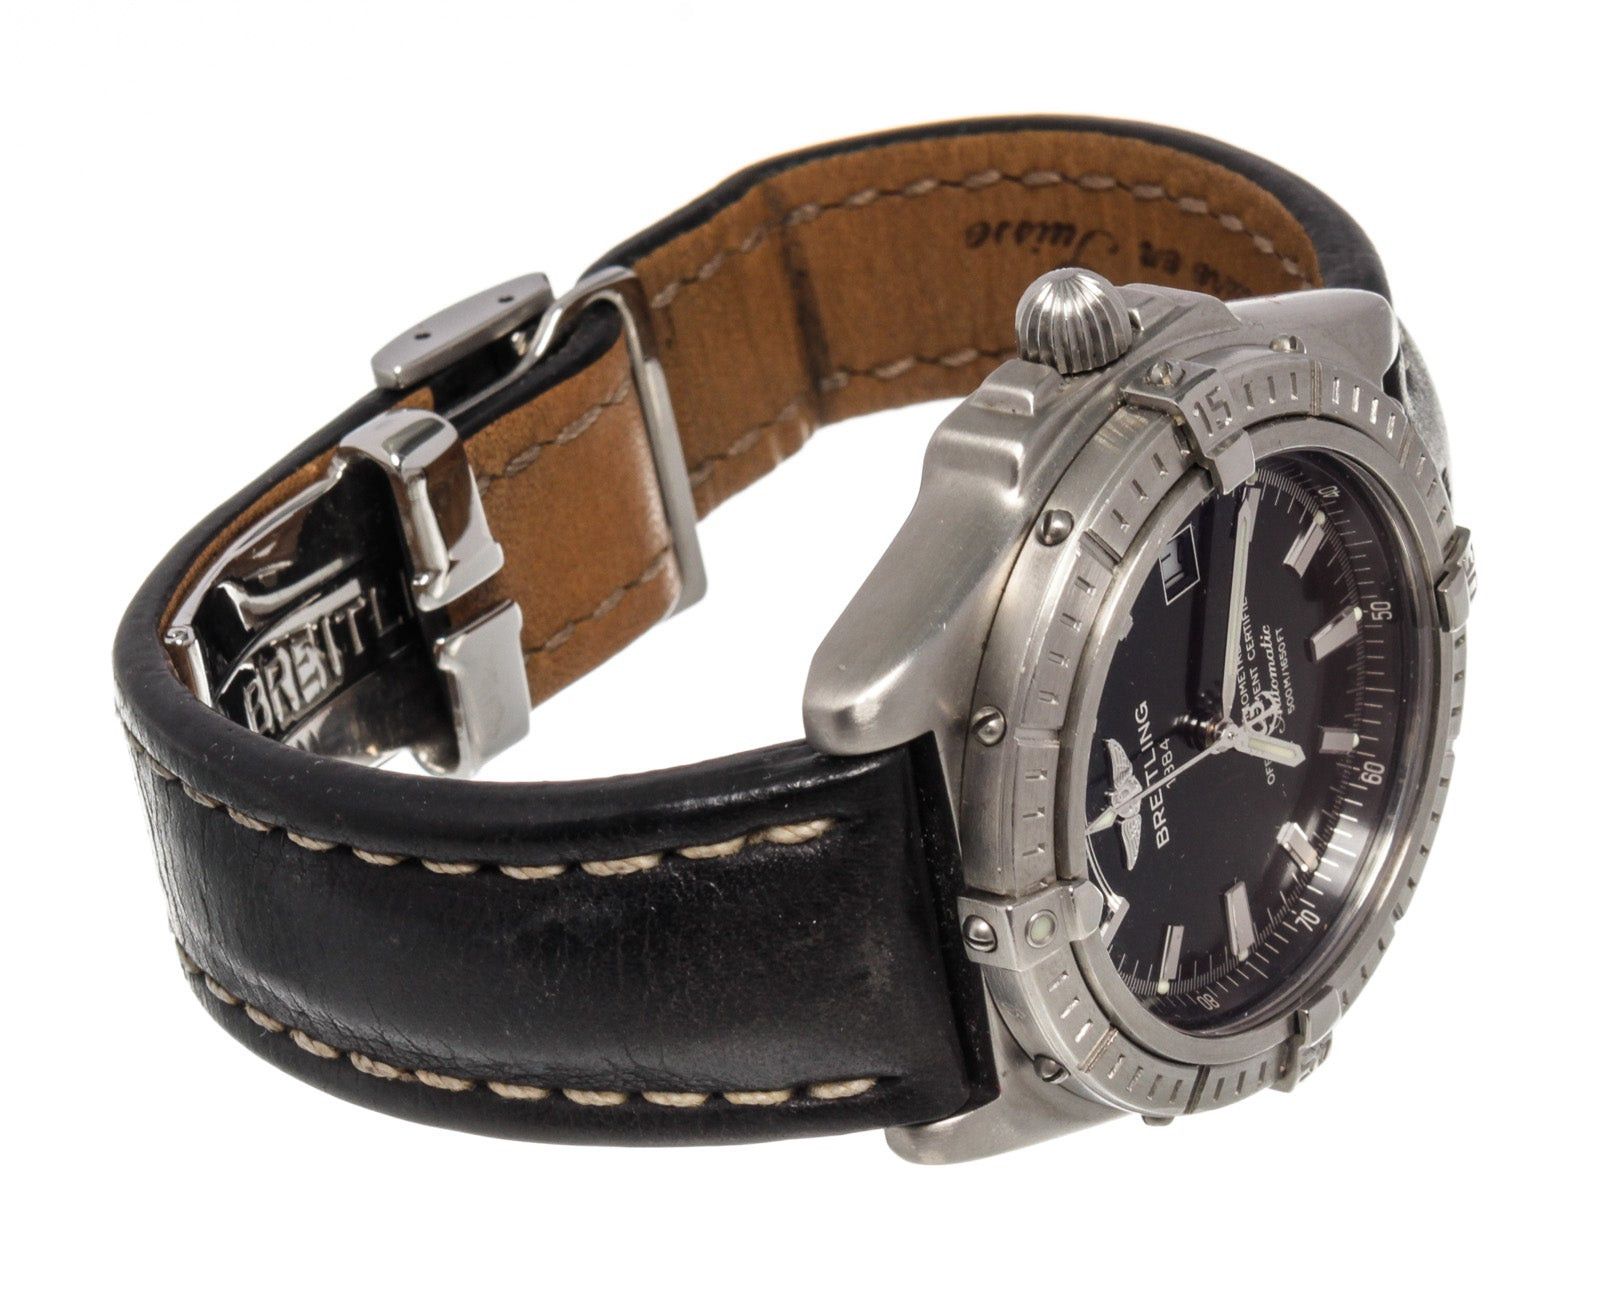 Breitling Breitling Black Leather Chronomet Watch Size ONE SIZE - 2 Preview